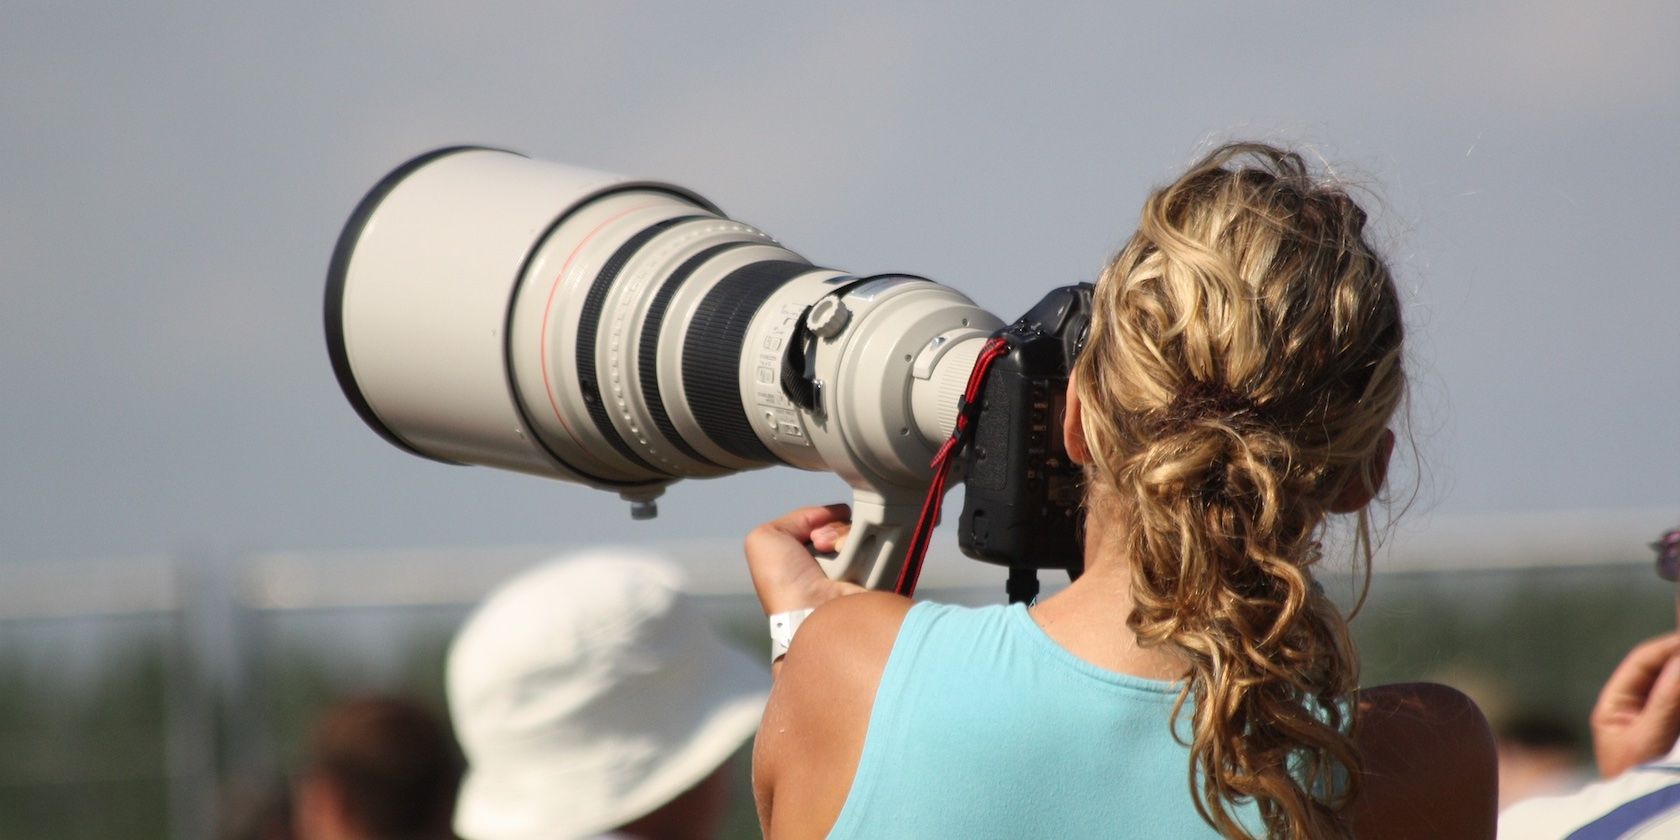 What Is a Telephoto Lens and What Would You Use One For?